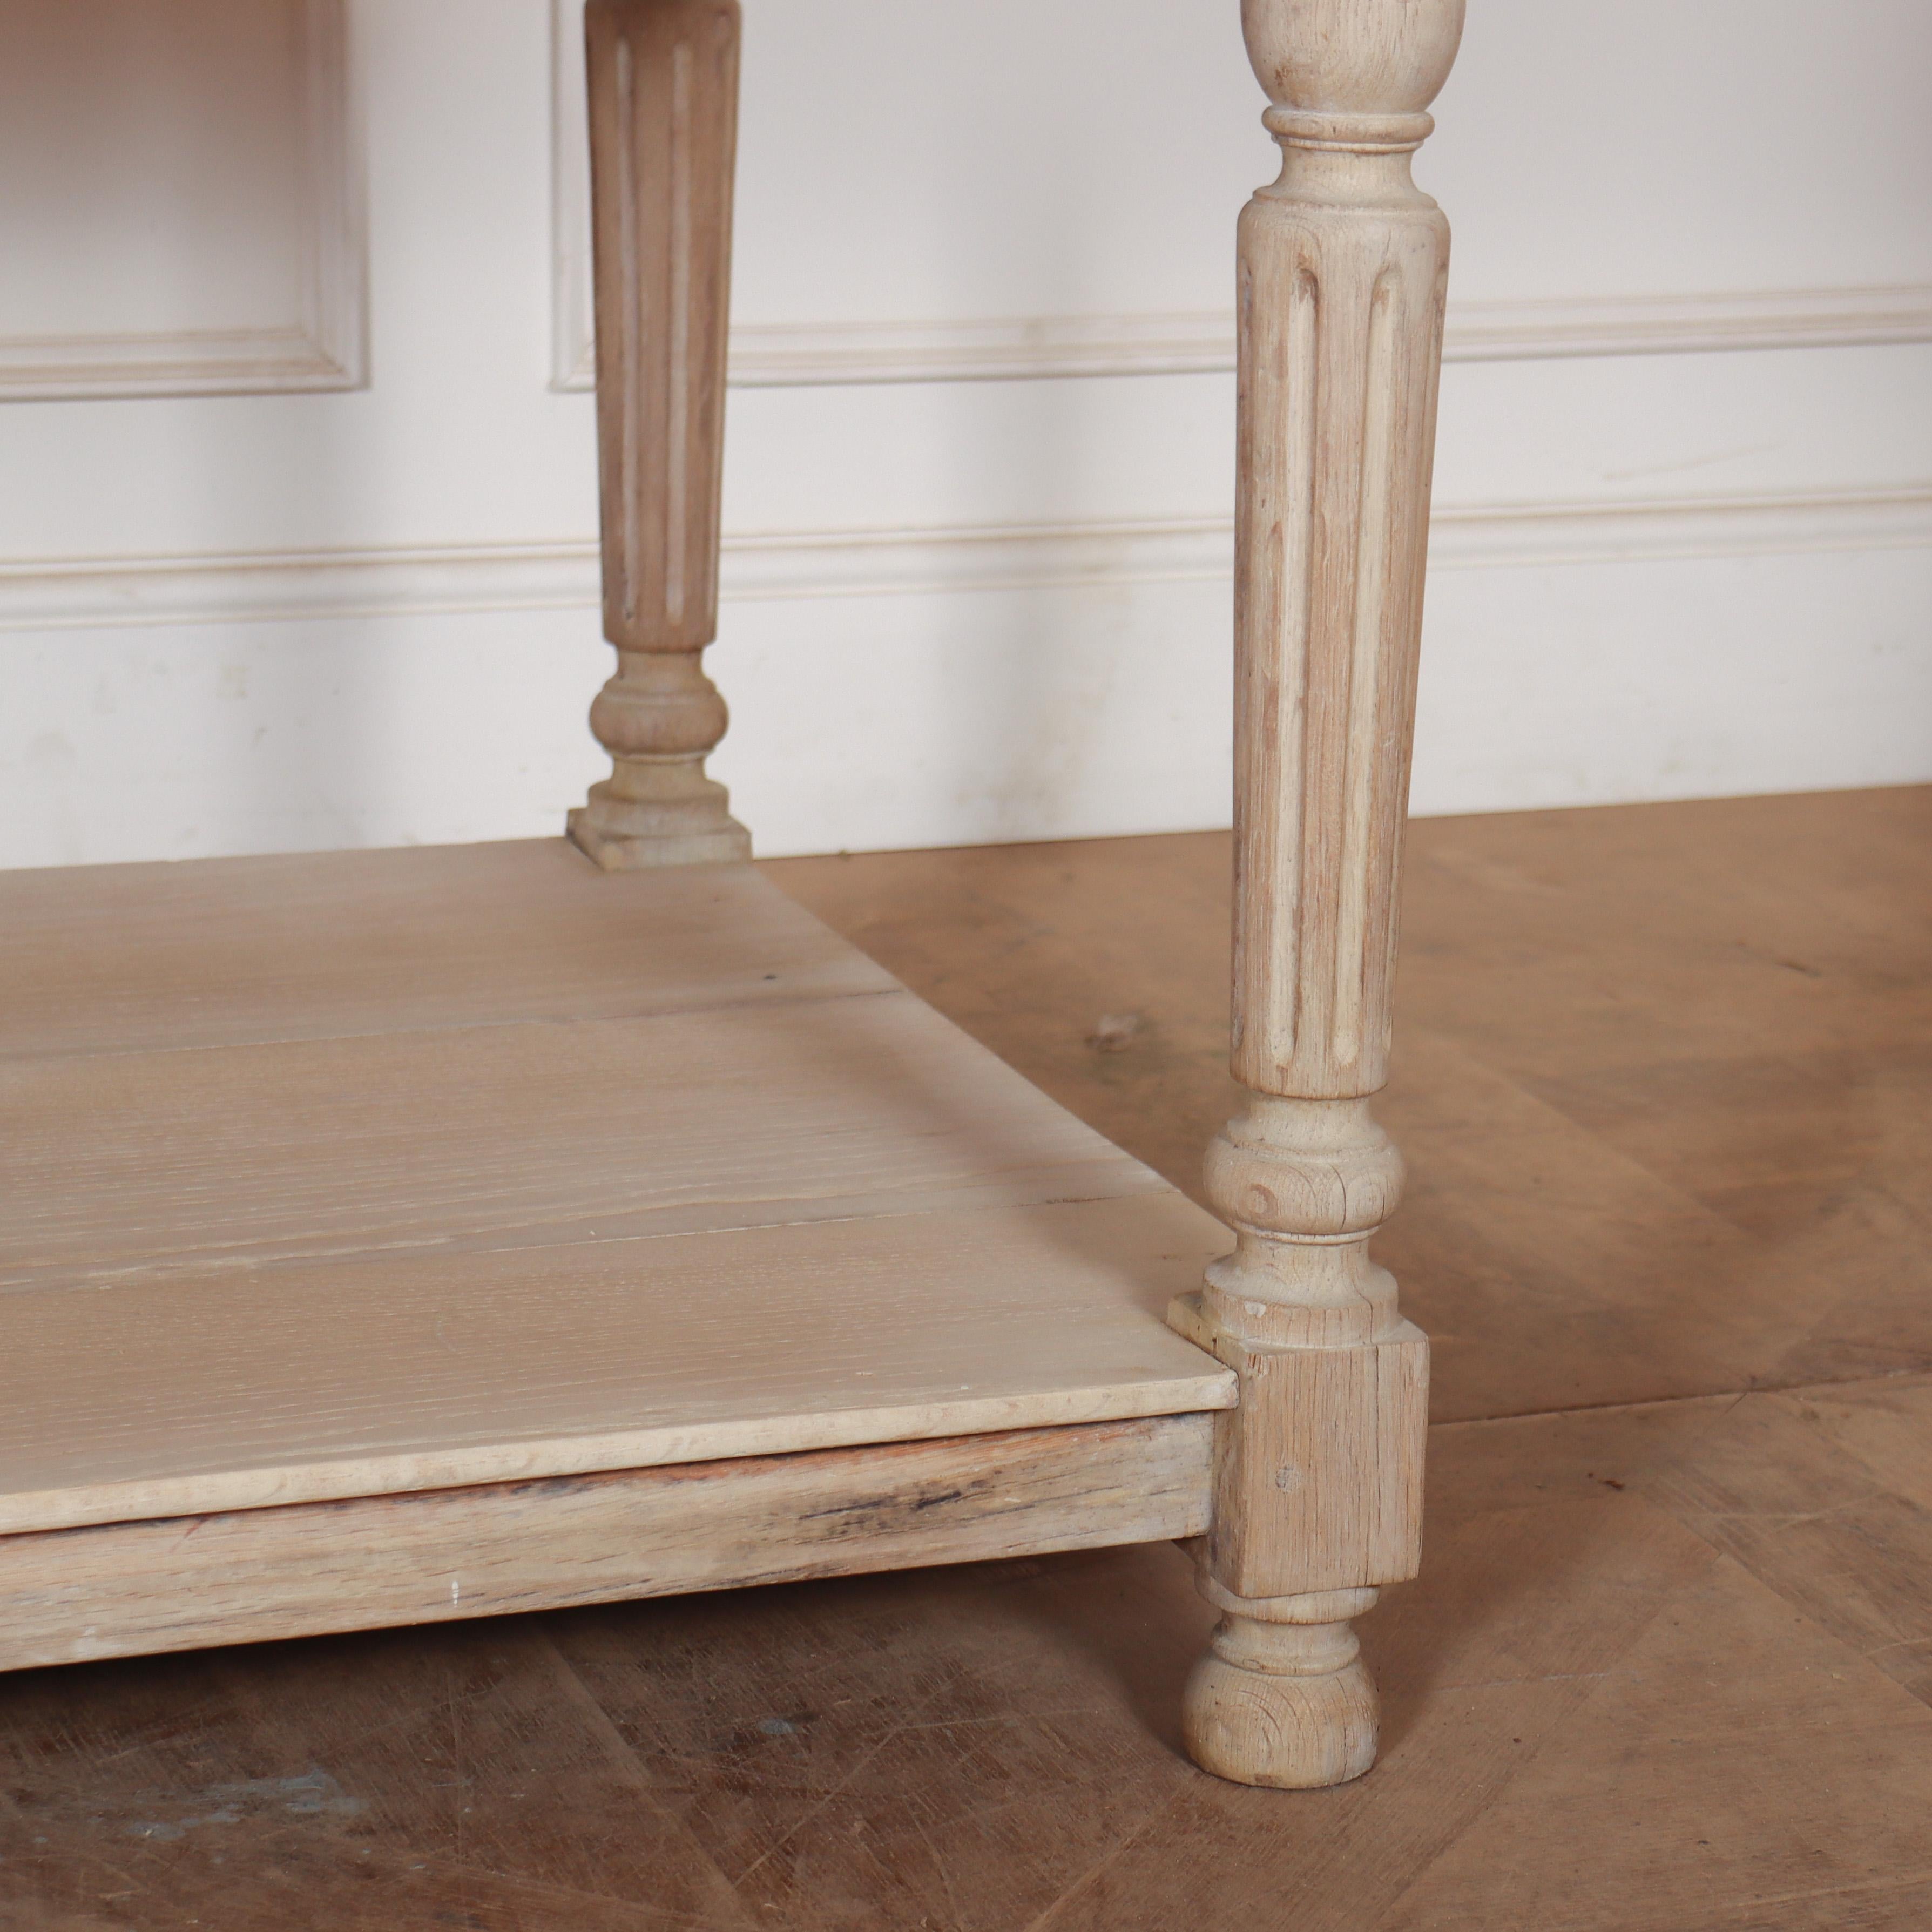 19th Century French Bleached Oak Drapers Table For Sale